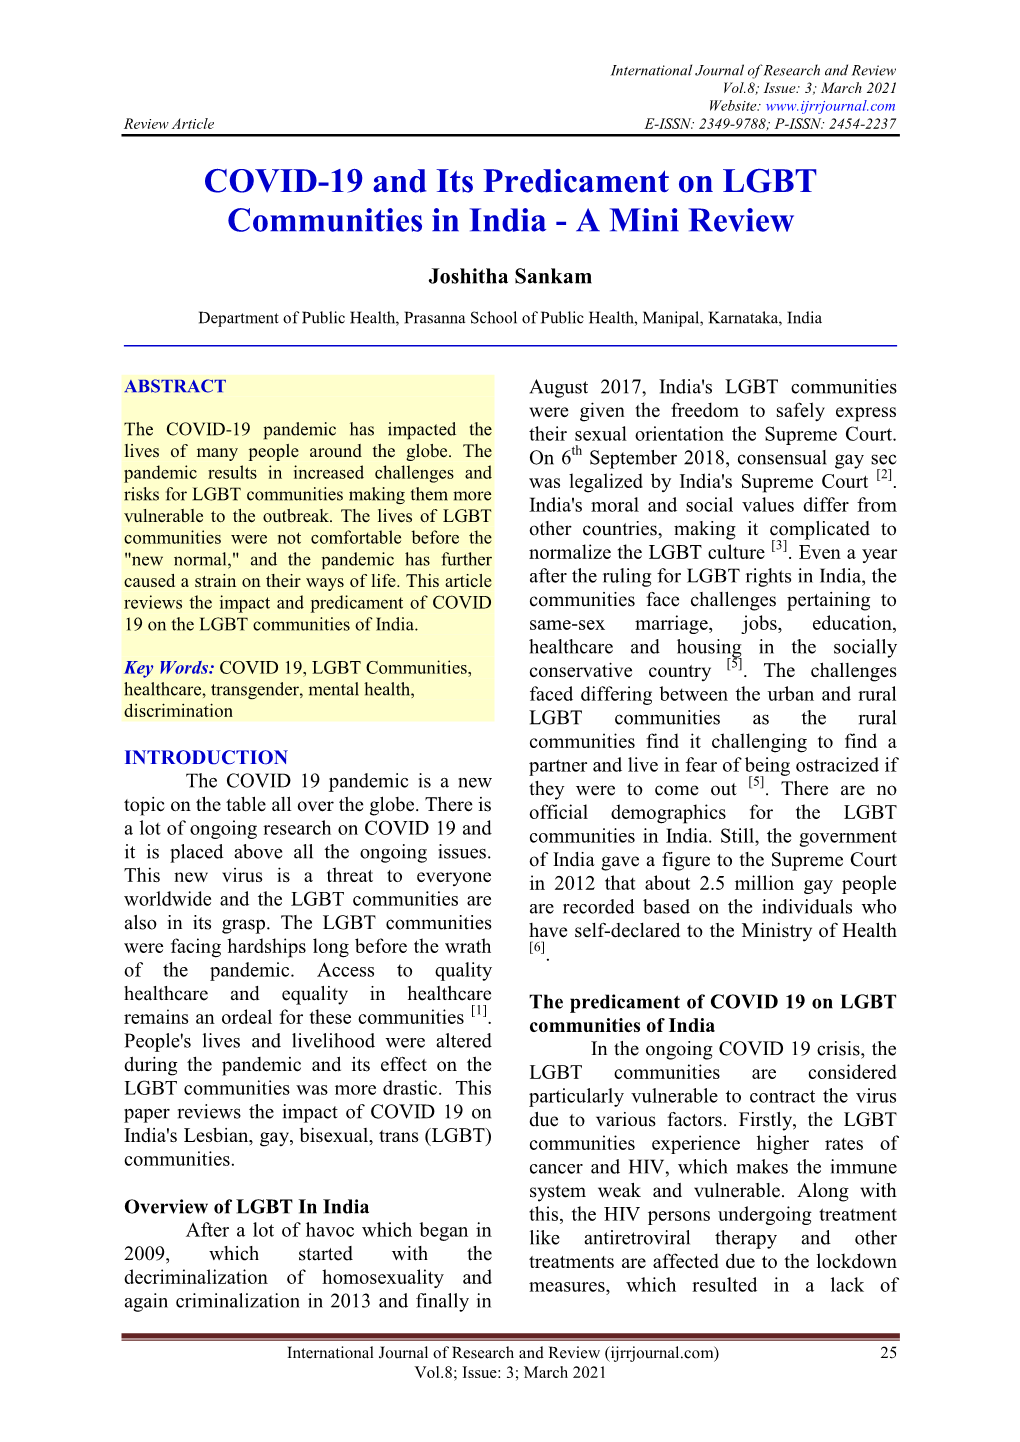 COVID-19 and Its Predicament on LGBT Communities in India - a Mini Review